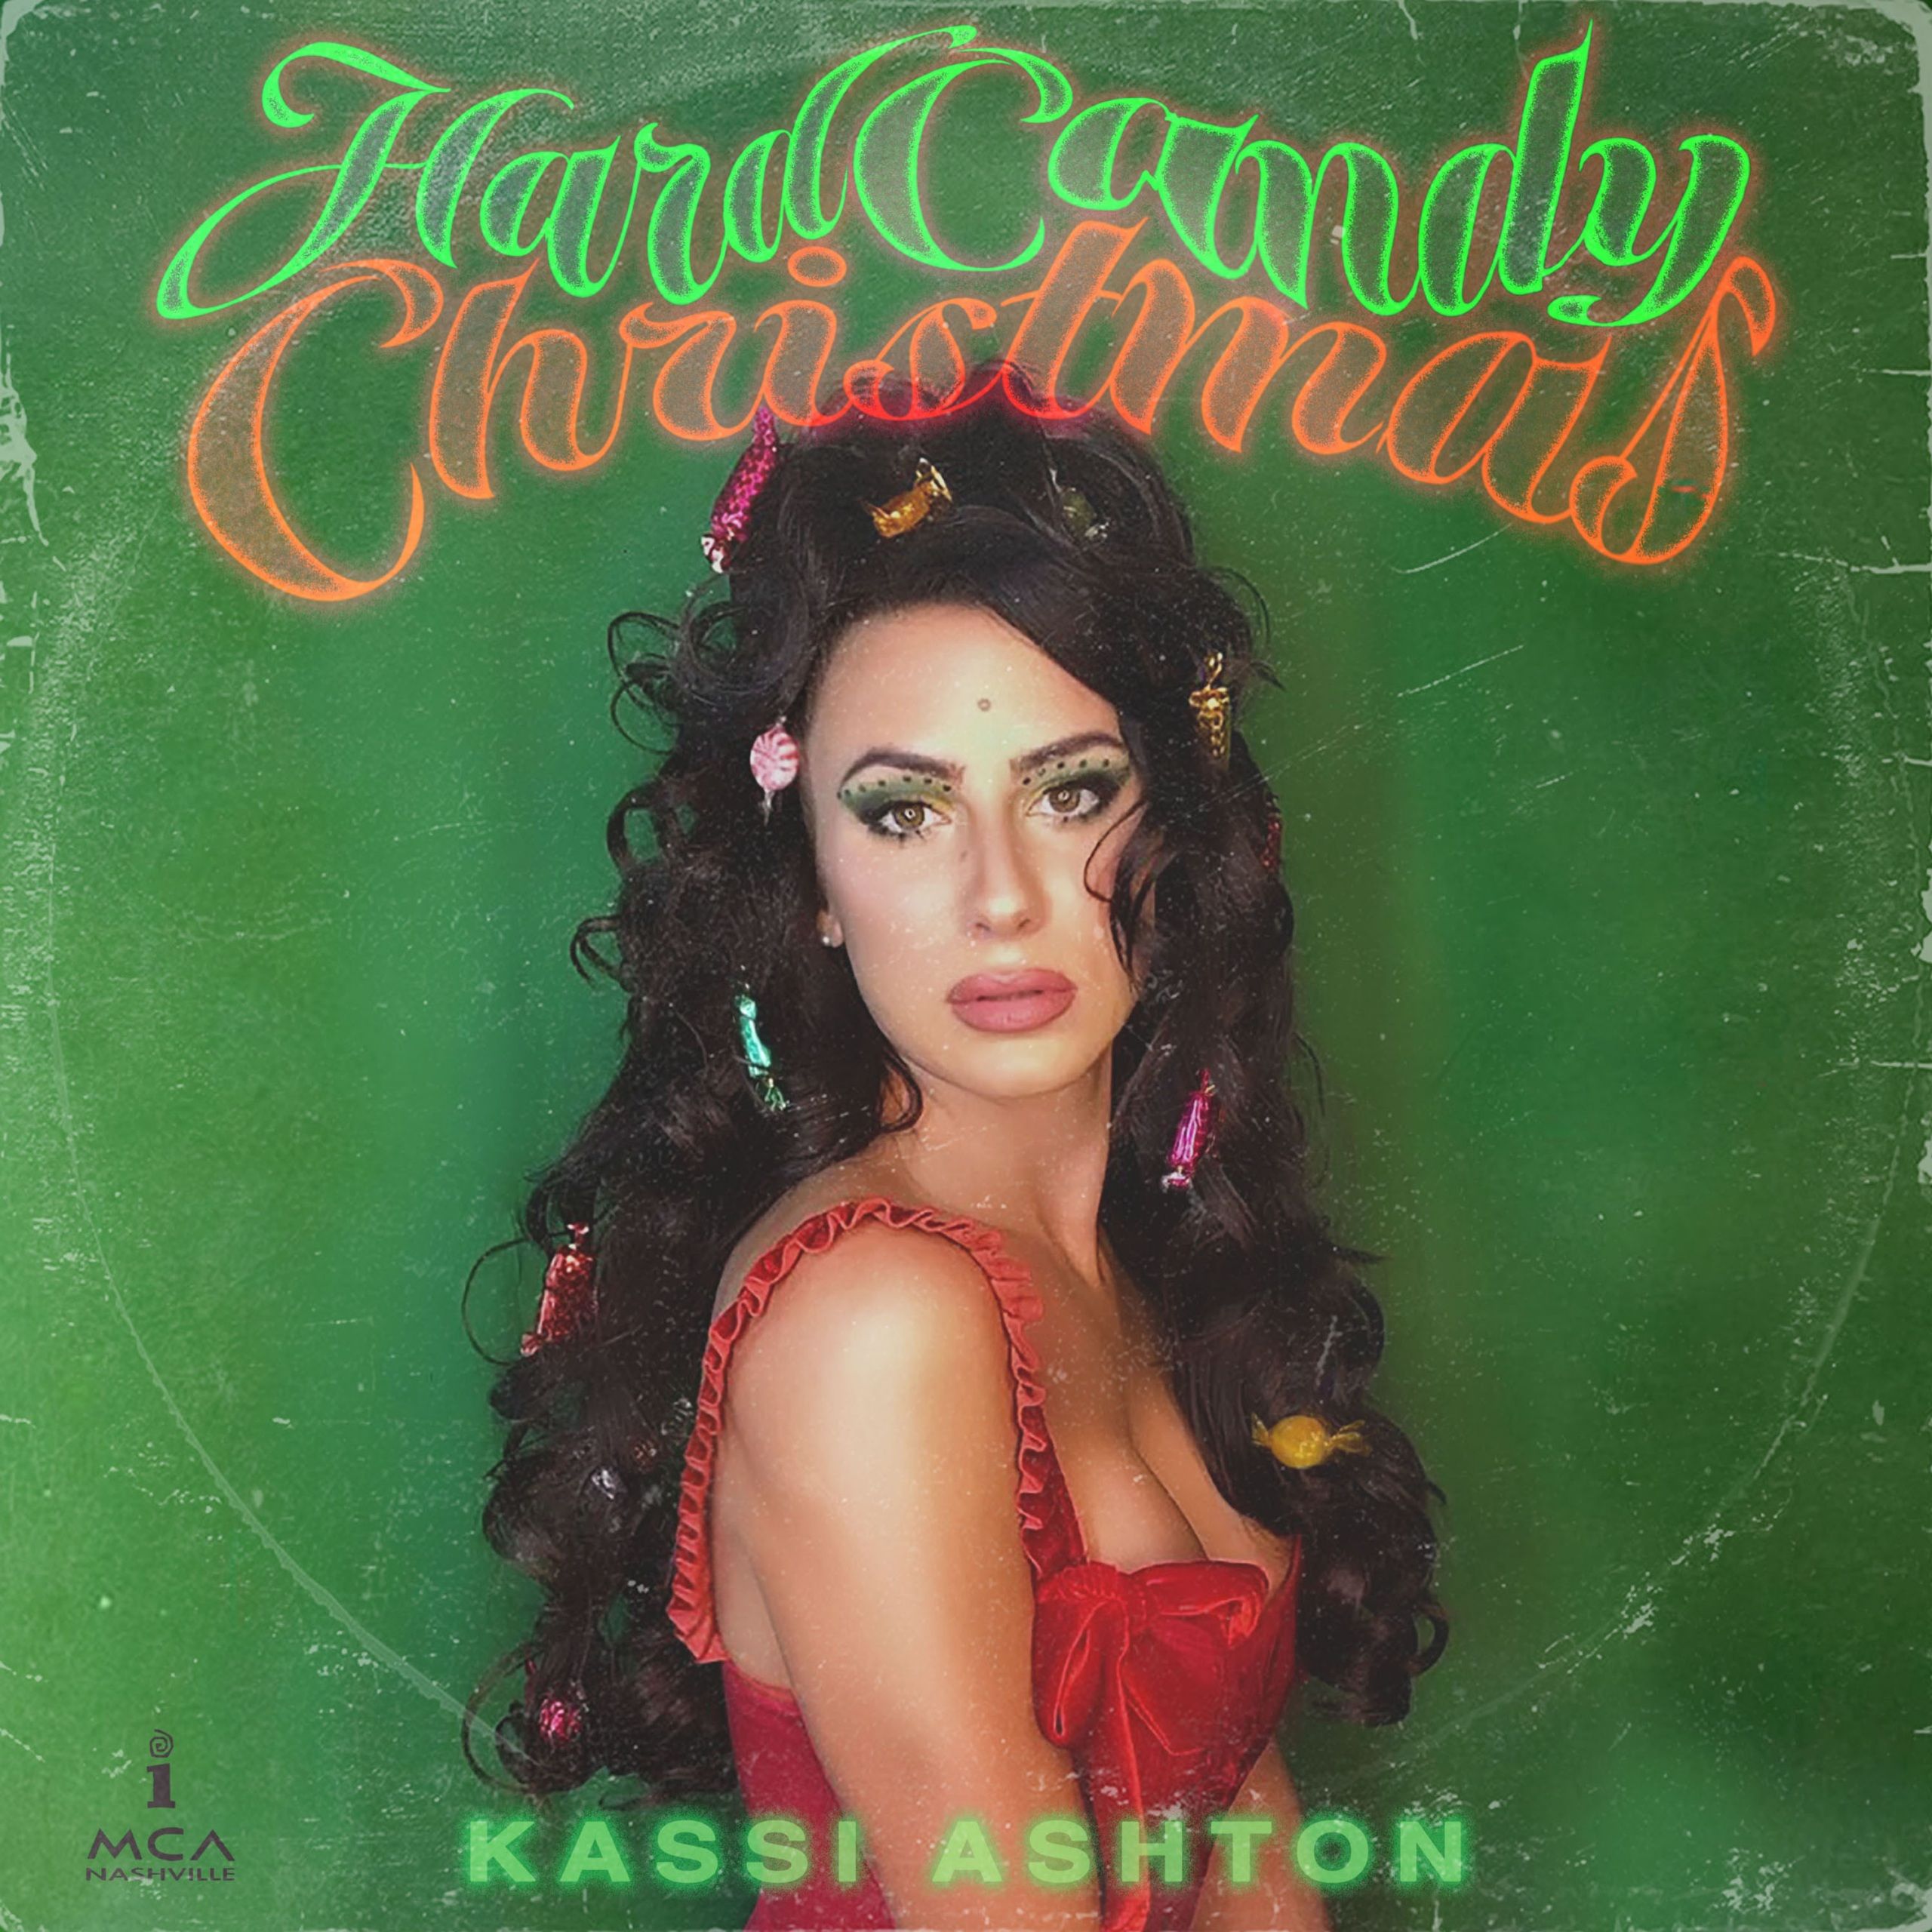 KASSI ASHTON RELEASES “HARD CANDY CHRISTMAS” TODAY